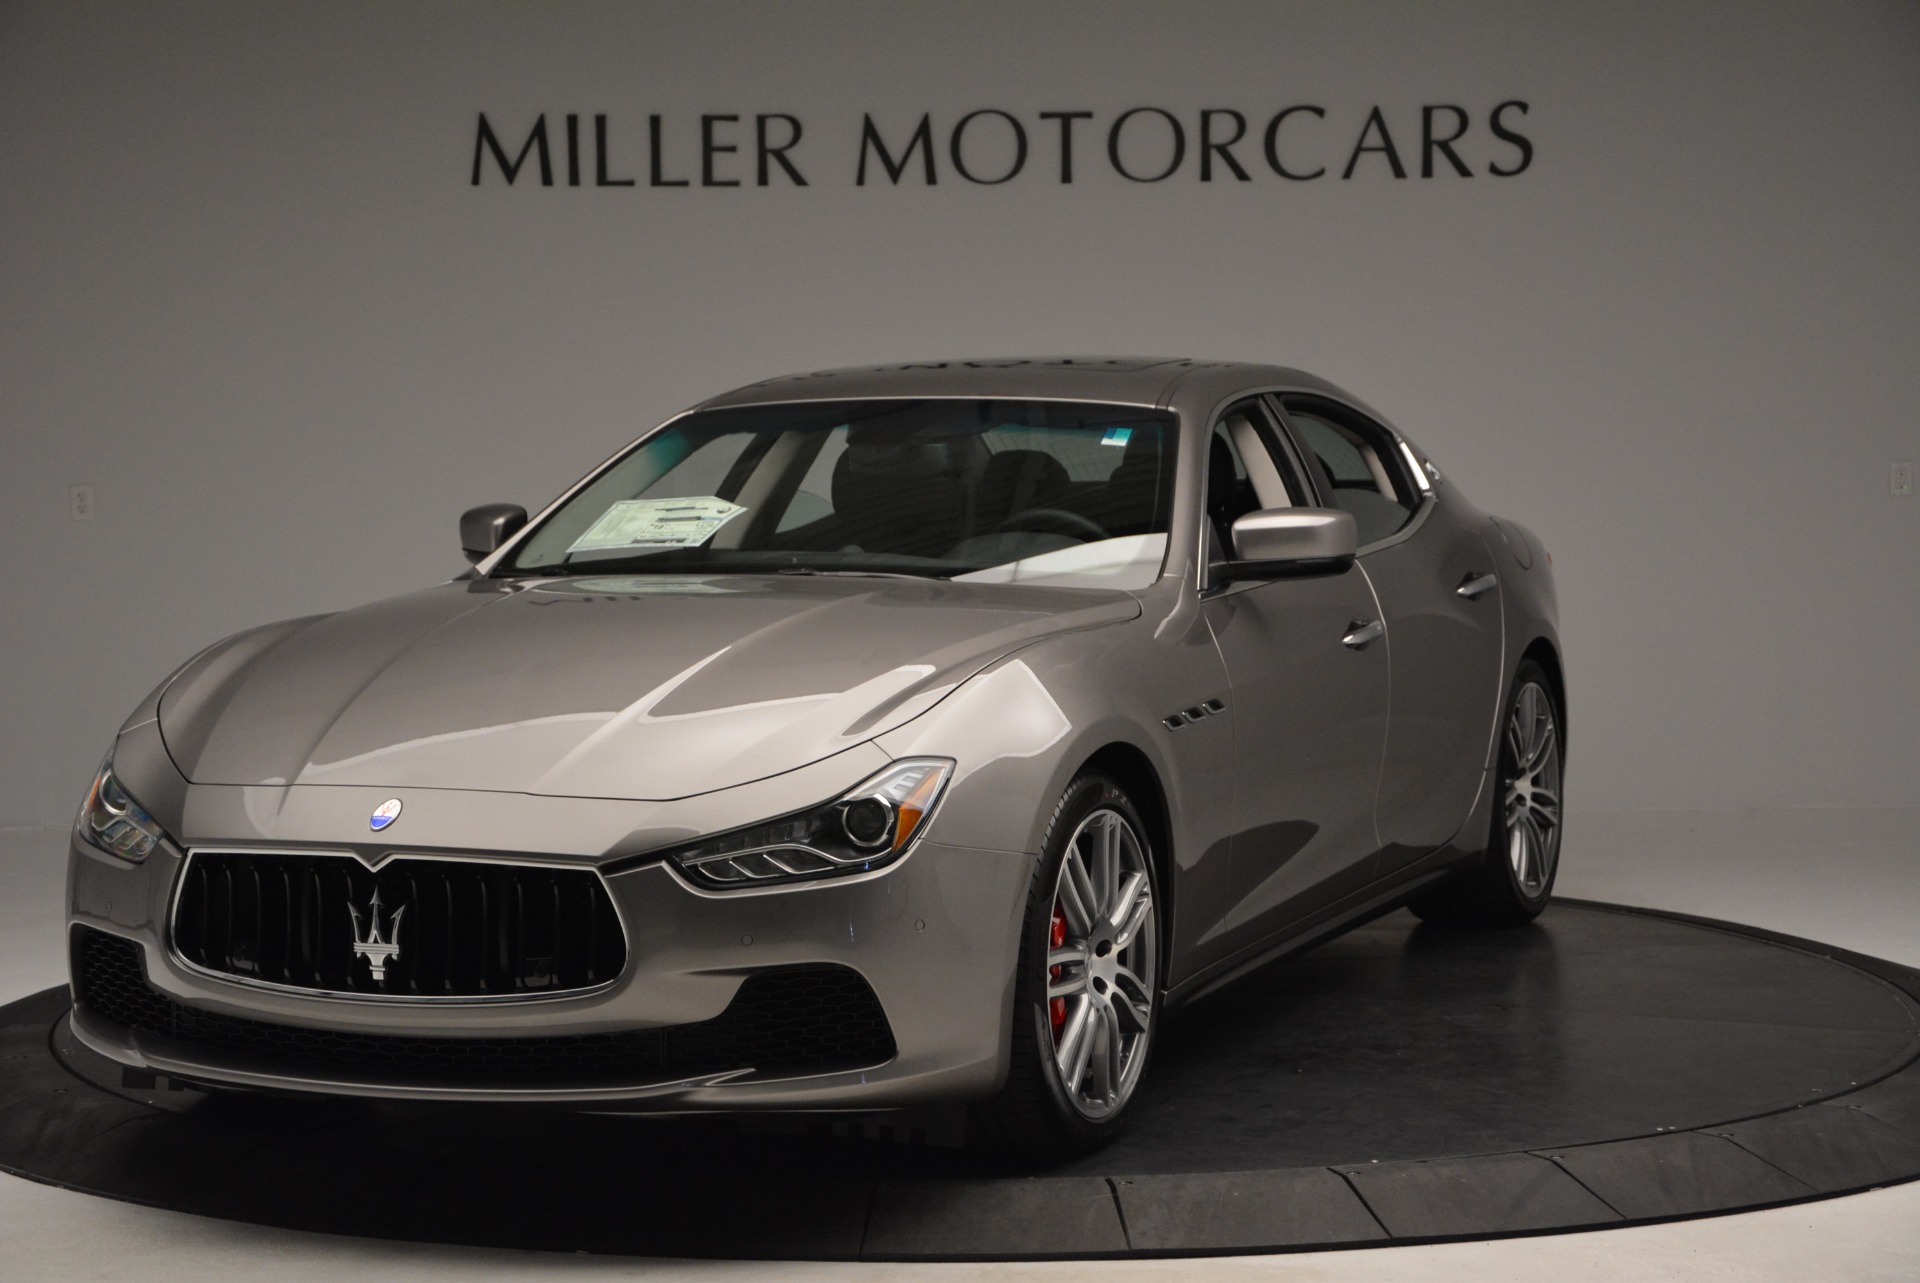 Used 2014 Maserati Ghibli S Q4 for sale Sold at Pagani of Greenwich in Greenwich CT 06830 1